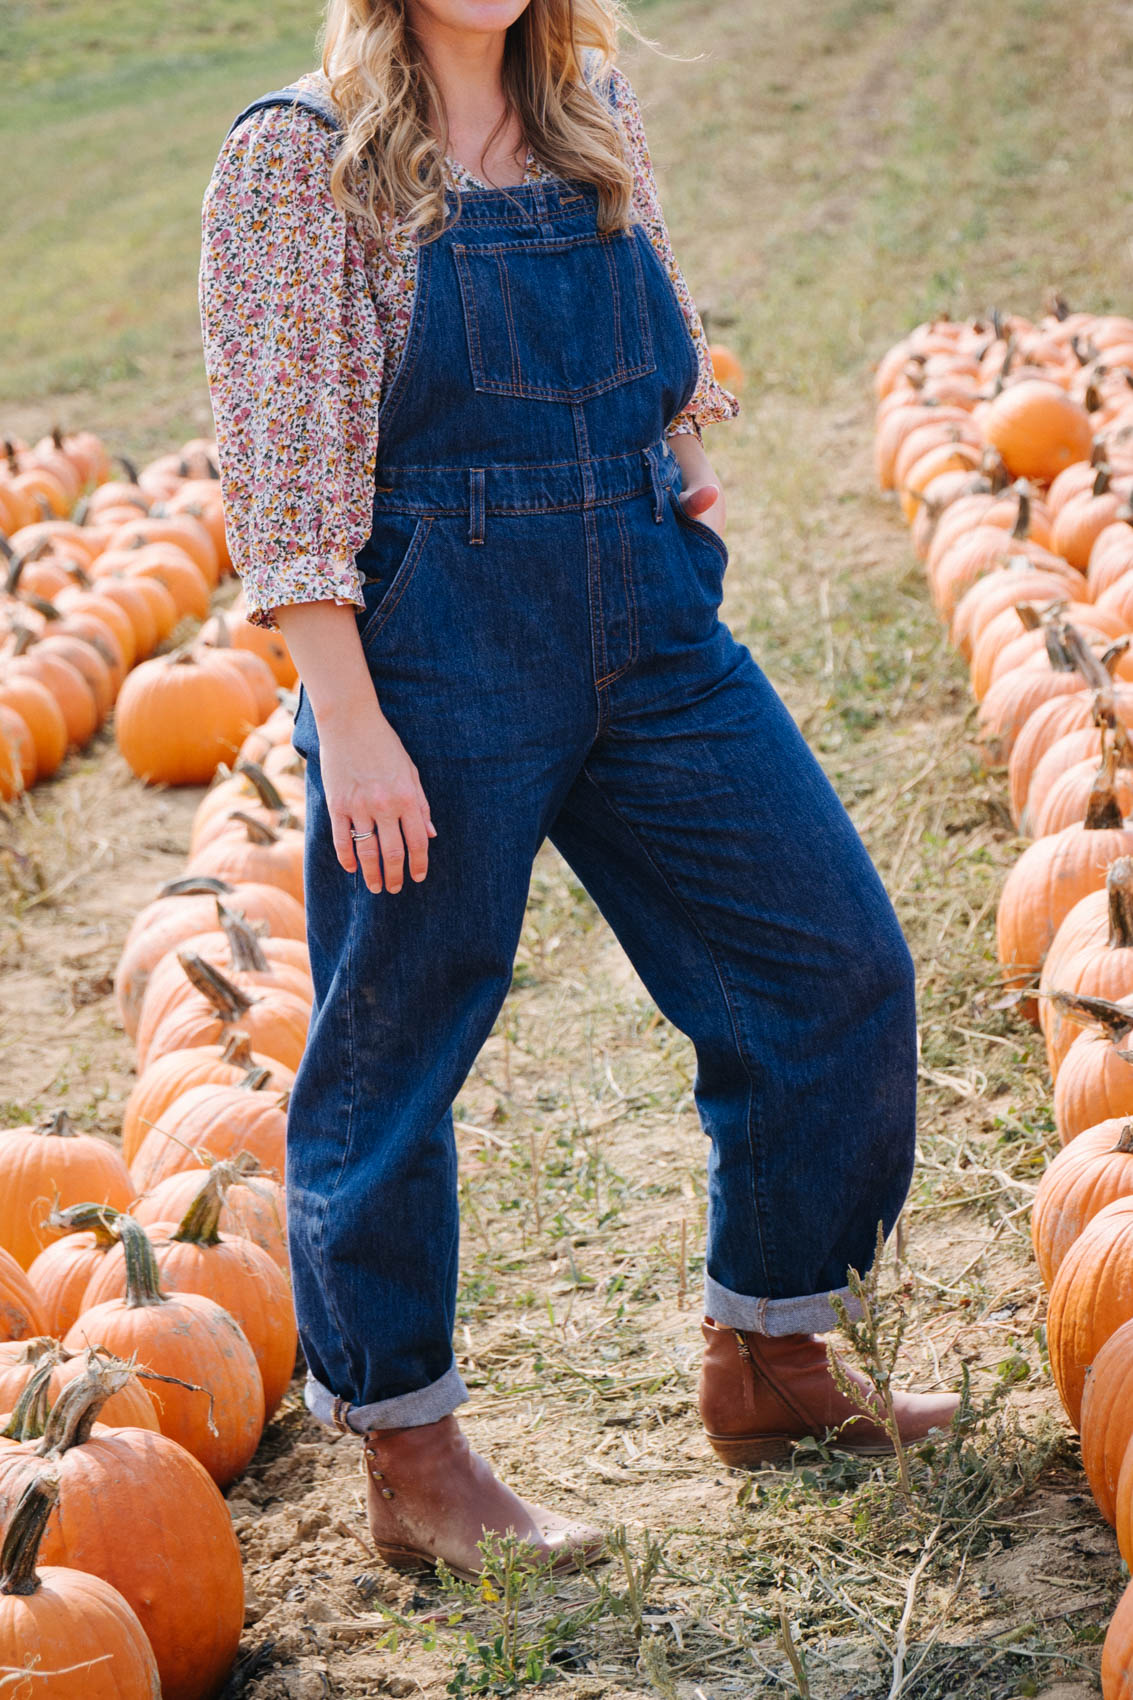 pumpkin patch photoshoot outfit idea with overalls | how to wear overalls